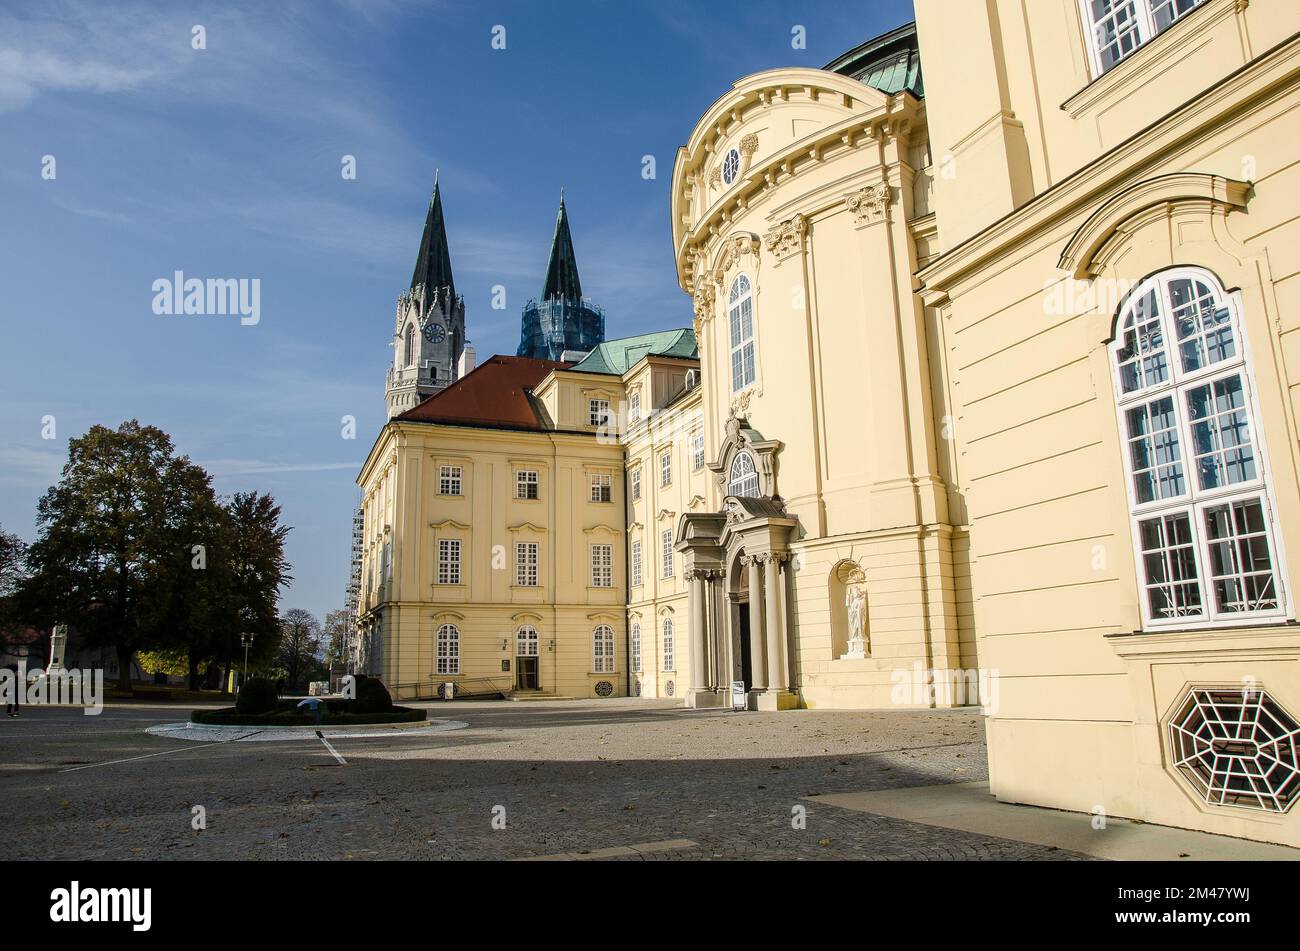 Klosterneuburg. famous for the monastery with vinery, Emperor's Palace, abbey and treasure. 15 km from central Vienna is definitely a place to visit Stock Photo